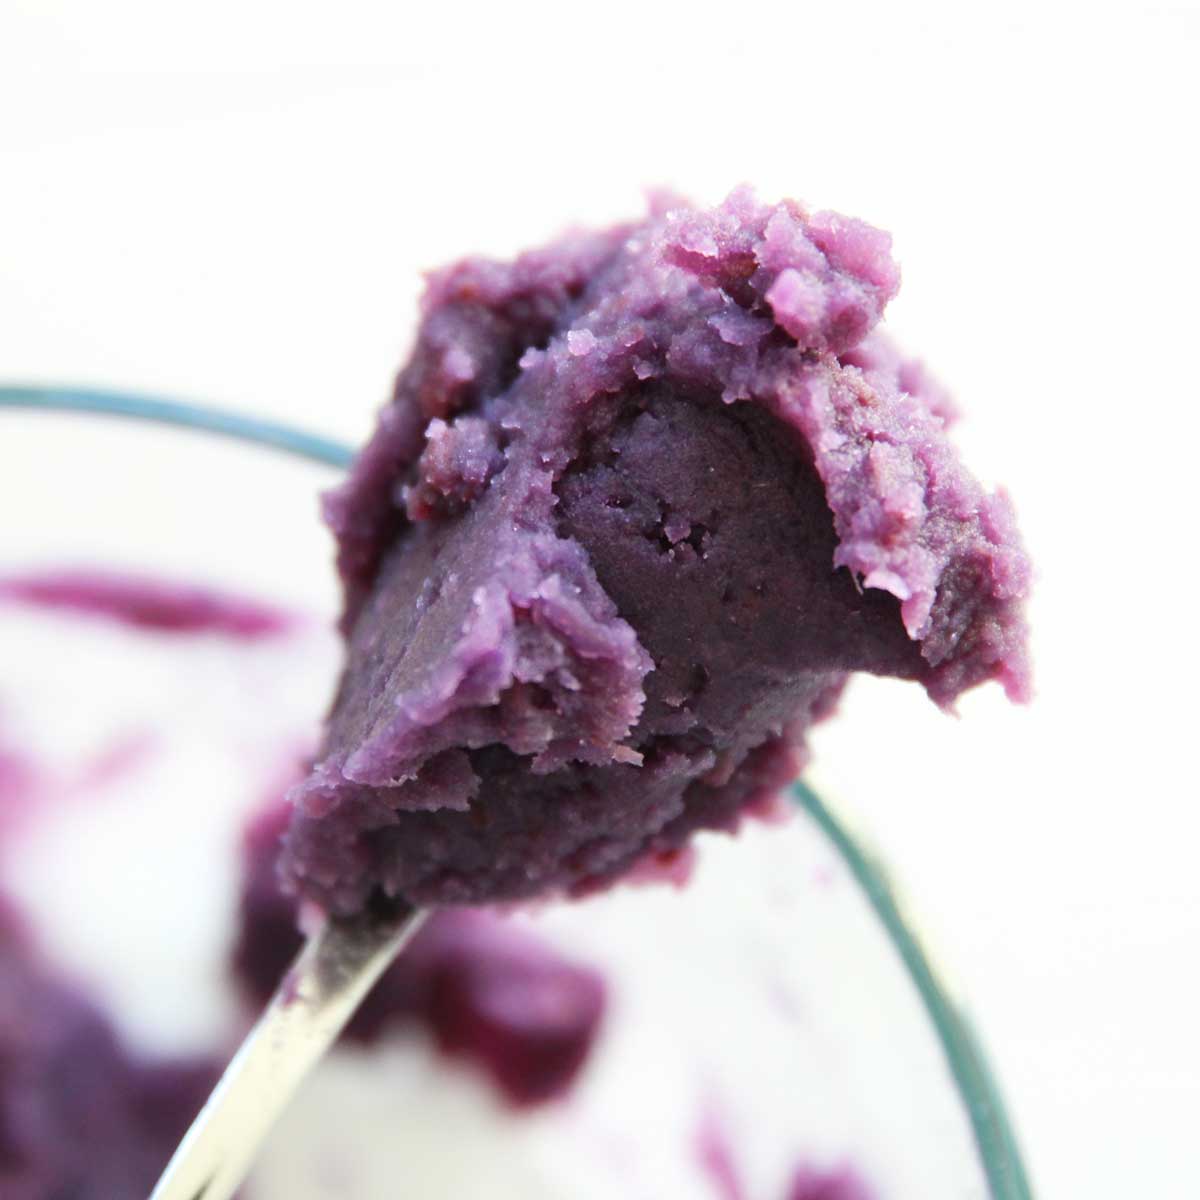 Purple Sweet Potato Filling Recipe for Mochi, Mooncakes and Steamed Buns - mochi fillings